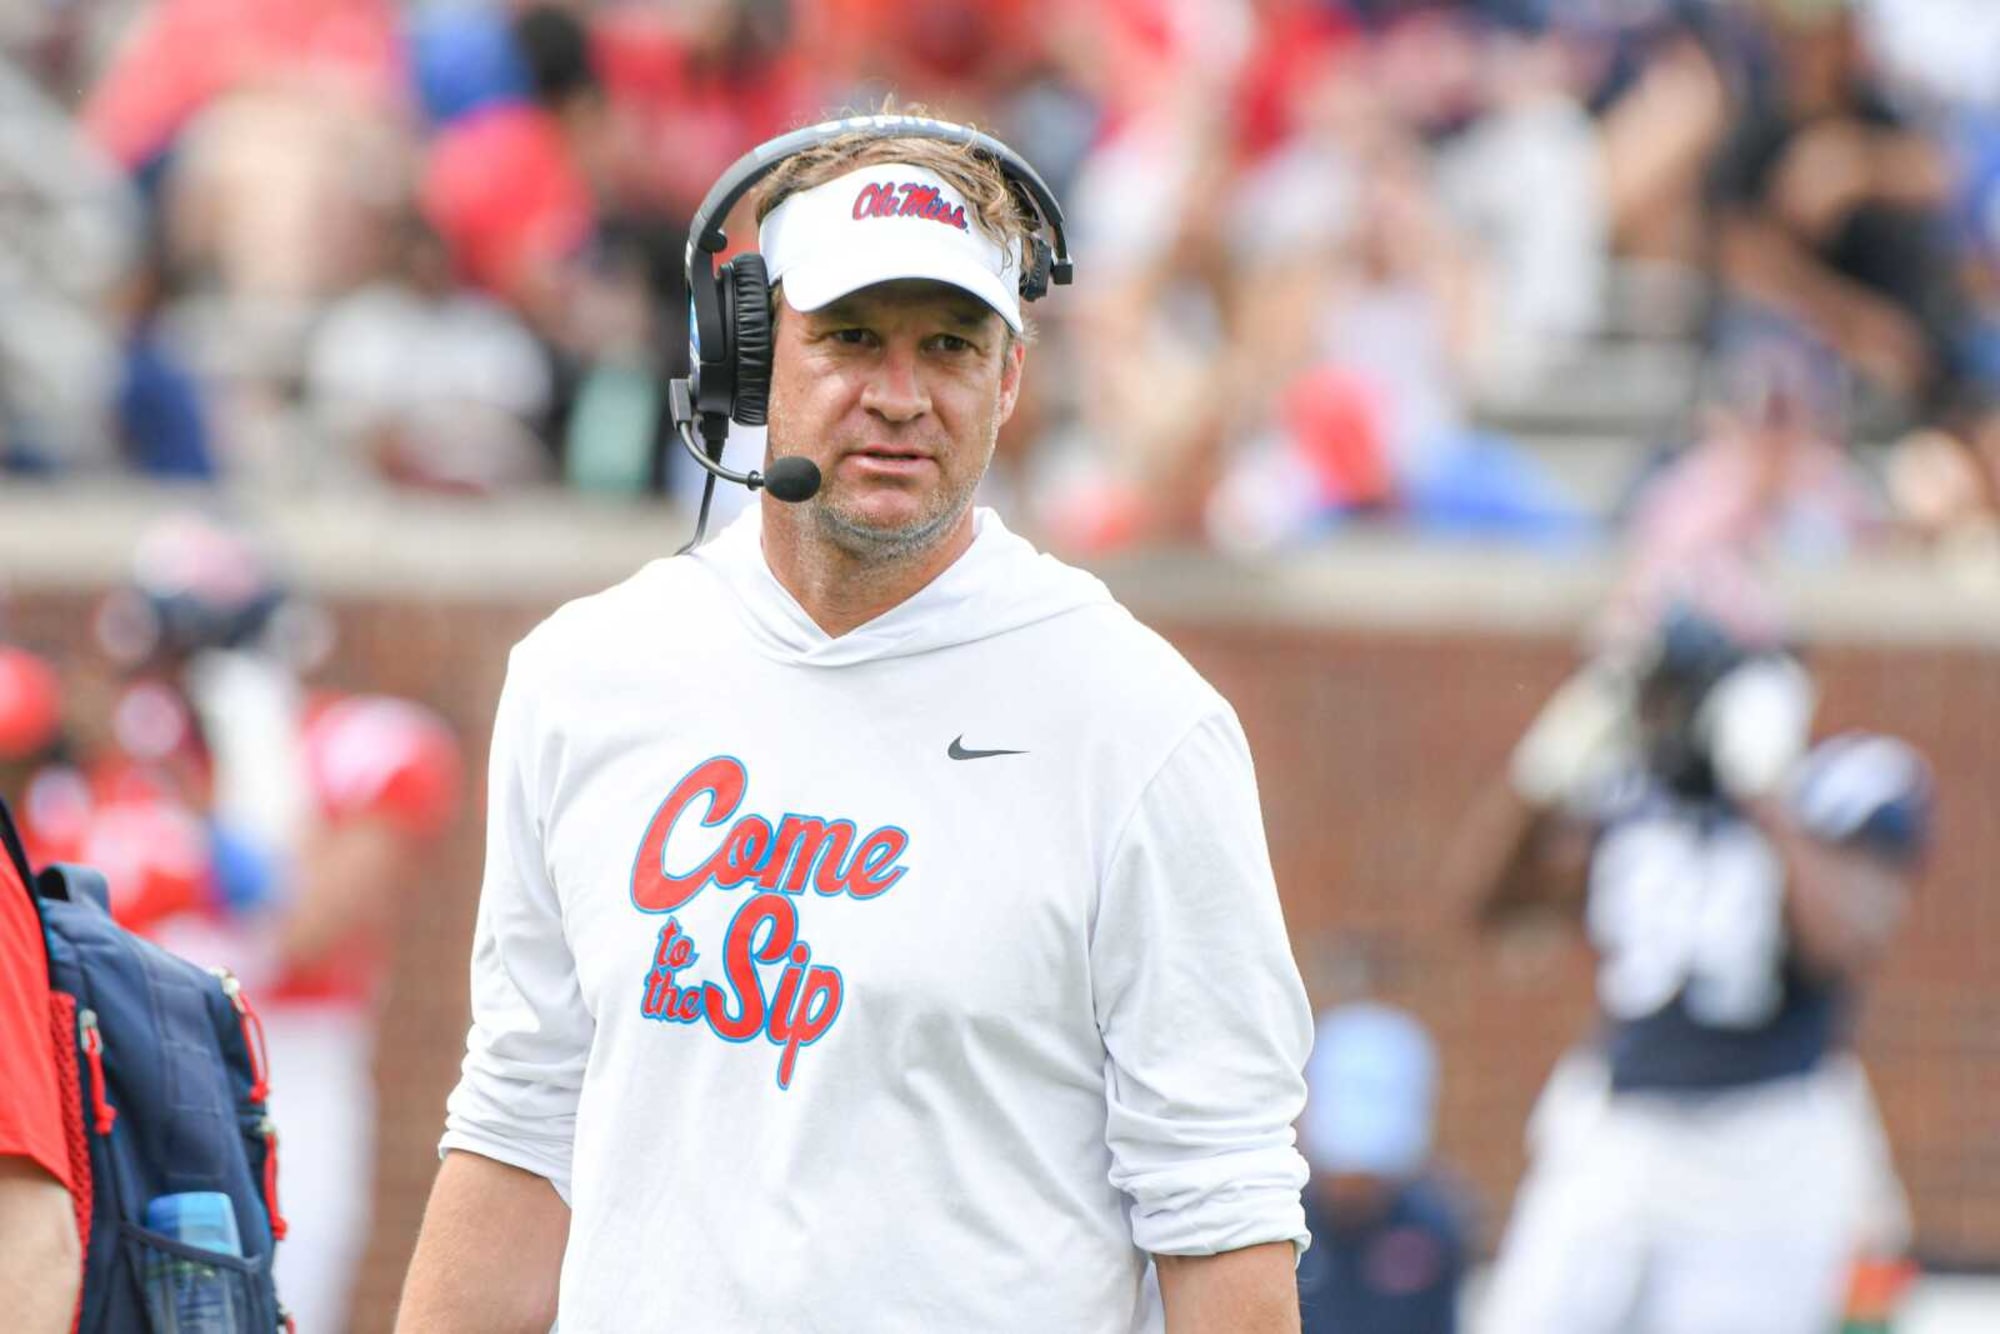 What does Lane Kiffin want to see from his quarterbacks in Grove Bowl?